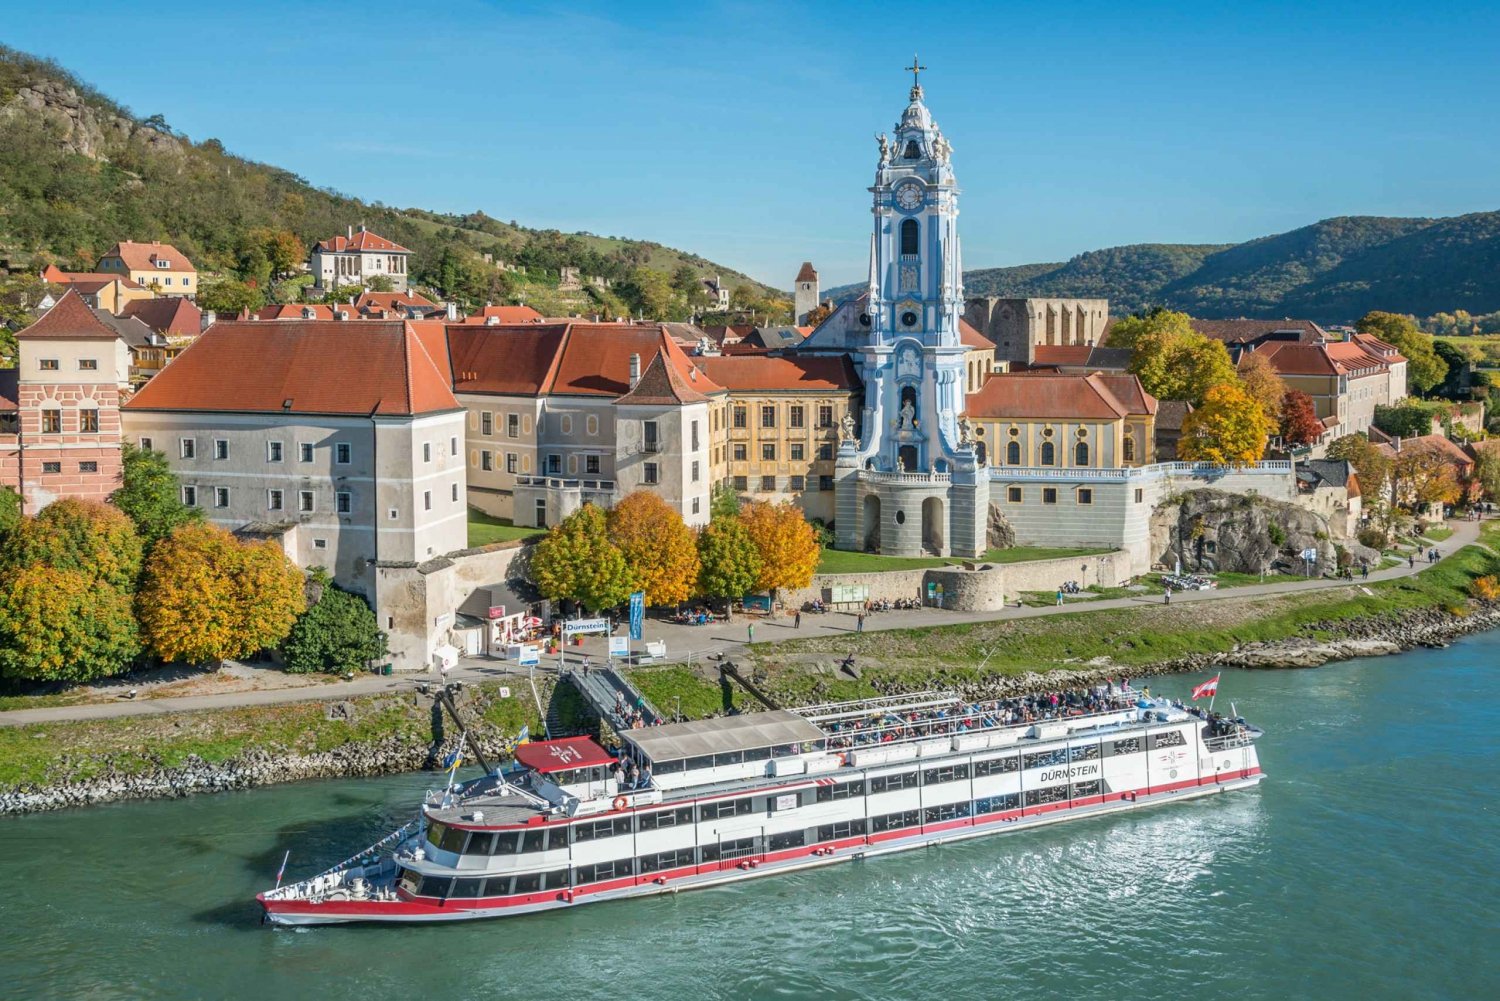 From Krems: Wachau Valley River Cruise on the Danube